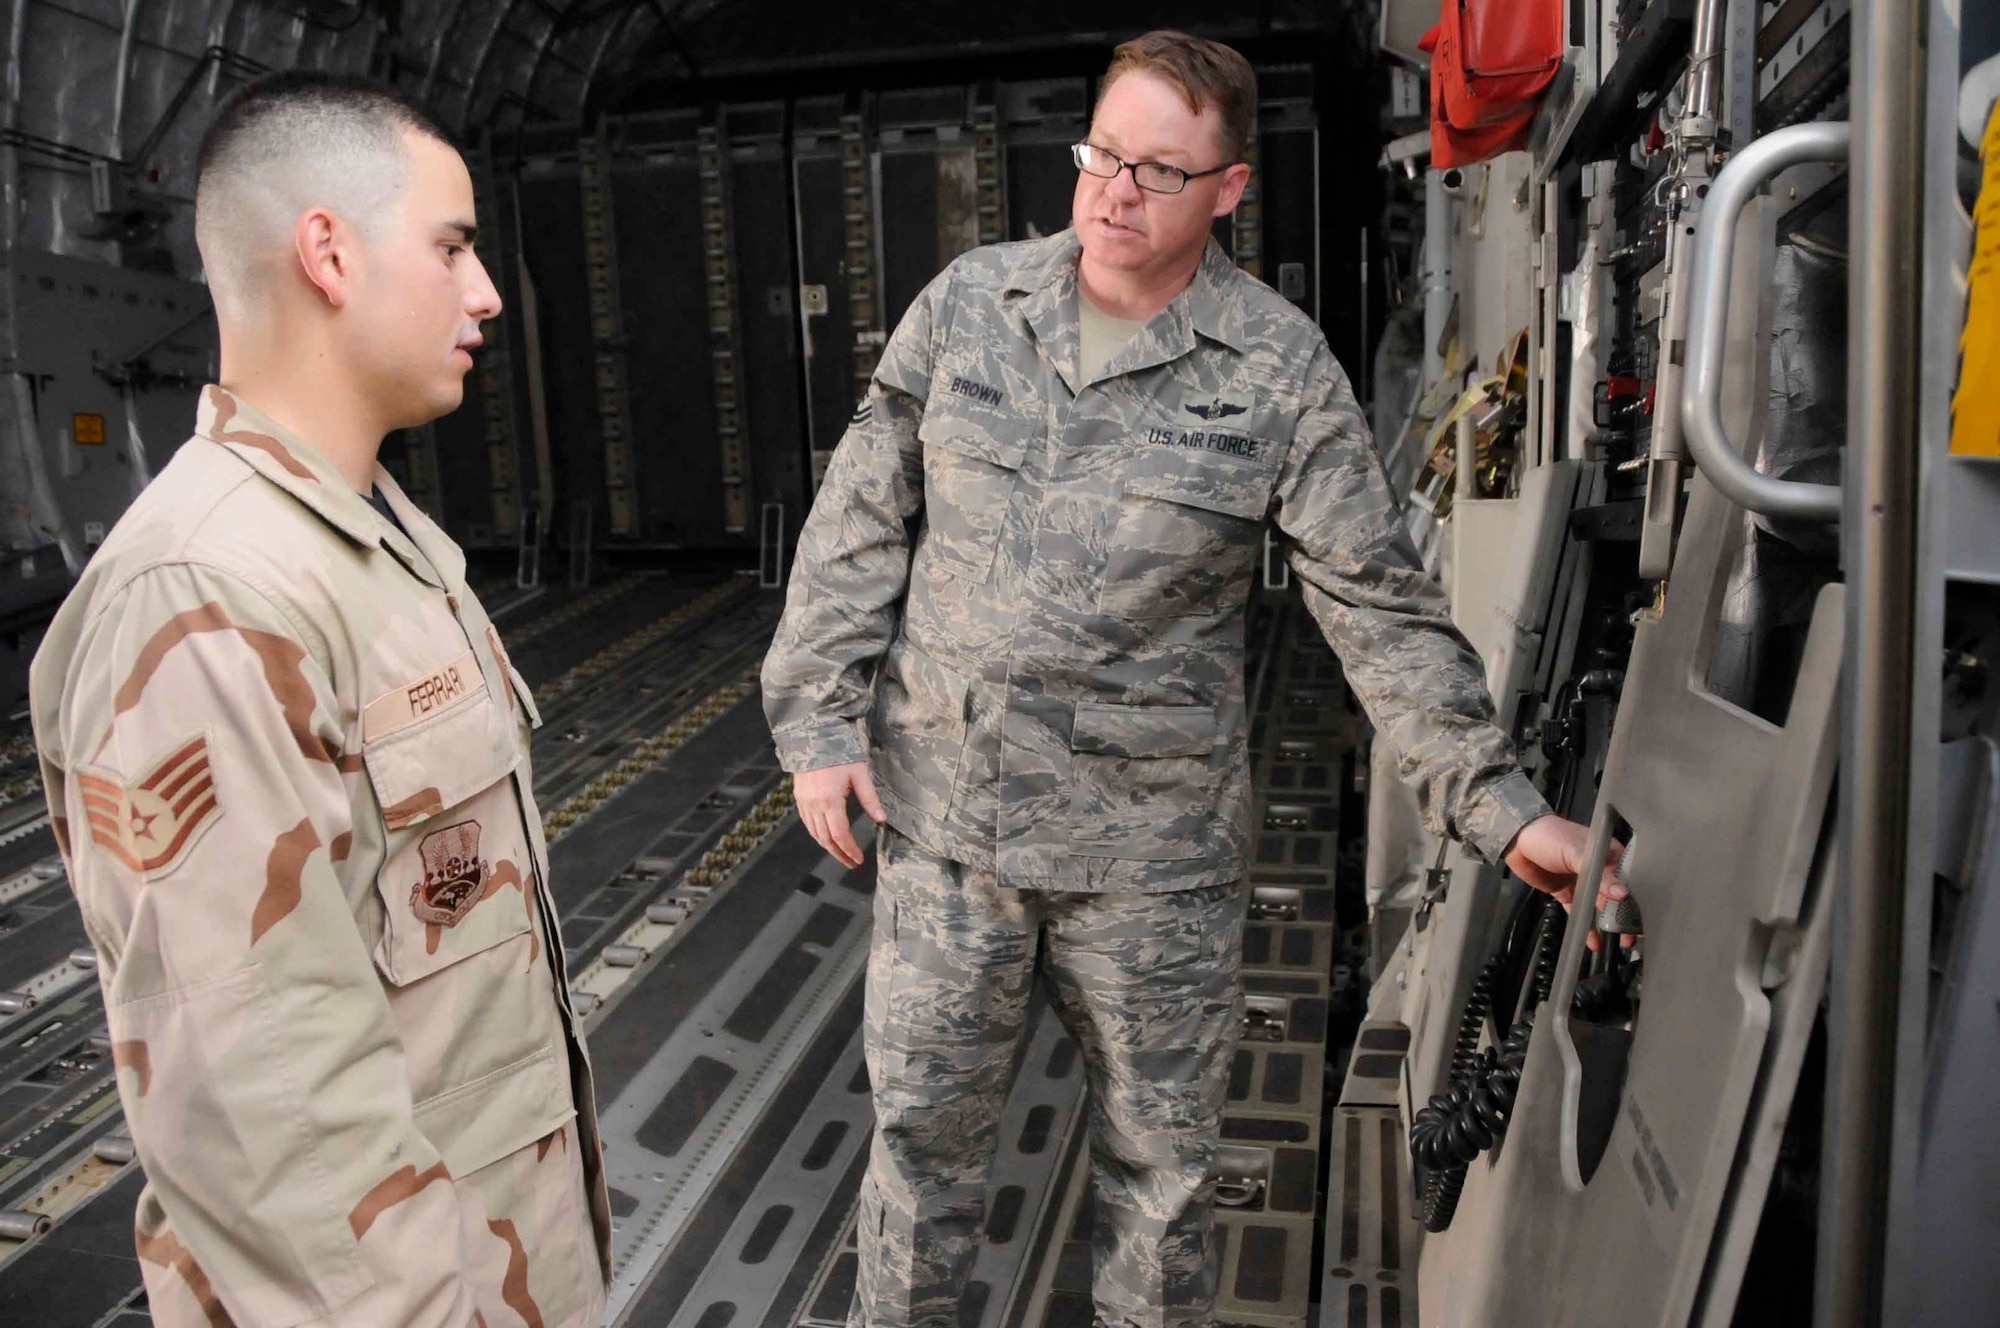 SOUTHWEST ASIA--Master Sgt. Will Brown, 816th Expeditionary Airlift Squadron, shows Staff Sgt. Enzzo Ferrari some of the tasks of a C-17 loadmaster June 24. Sergeant Ferrari is interested in cross-training from the 379th Expeditionary Operations Support Squadron. (U.S. Air Force photo/Senior Airman Domonique Simmons)